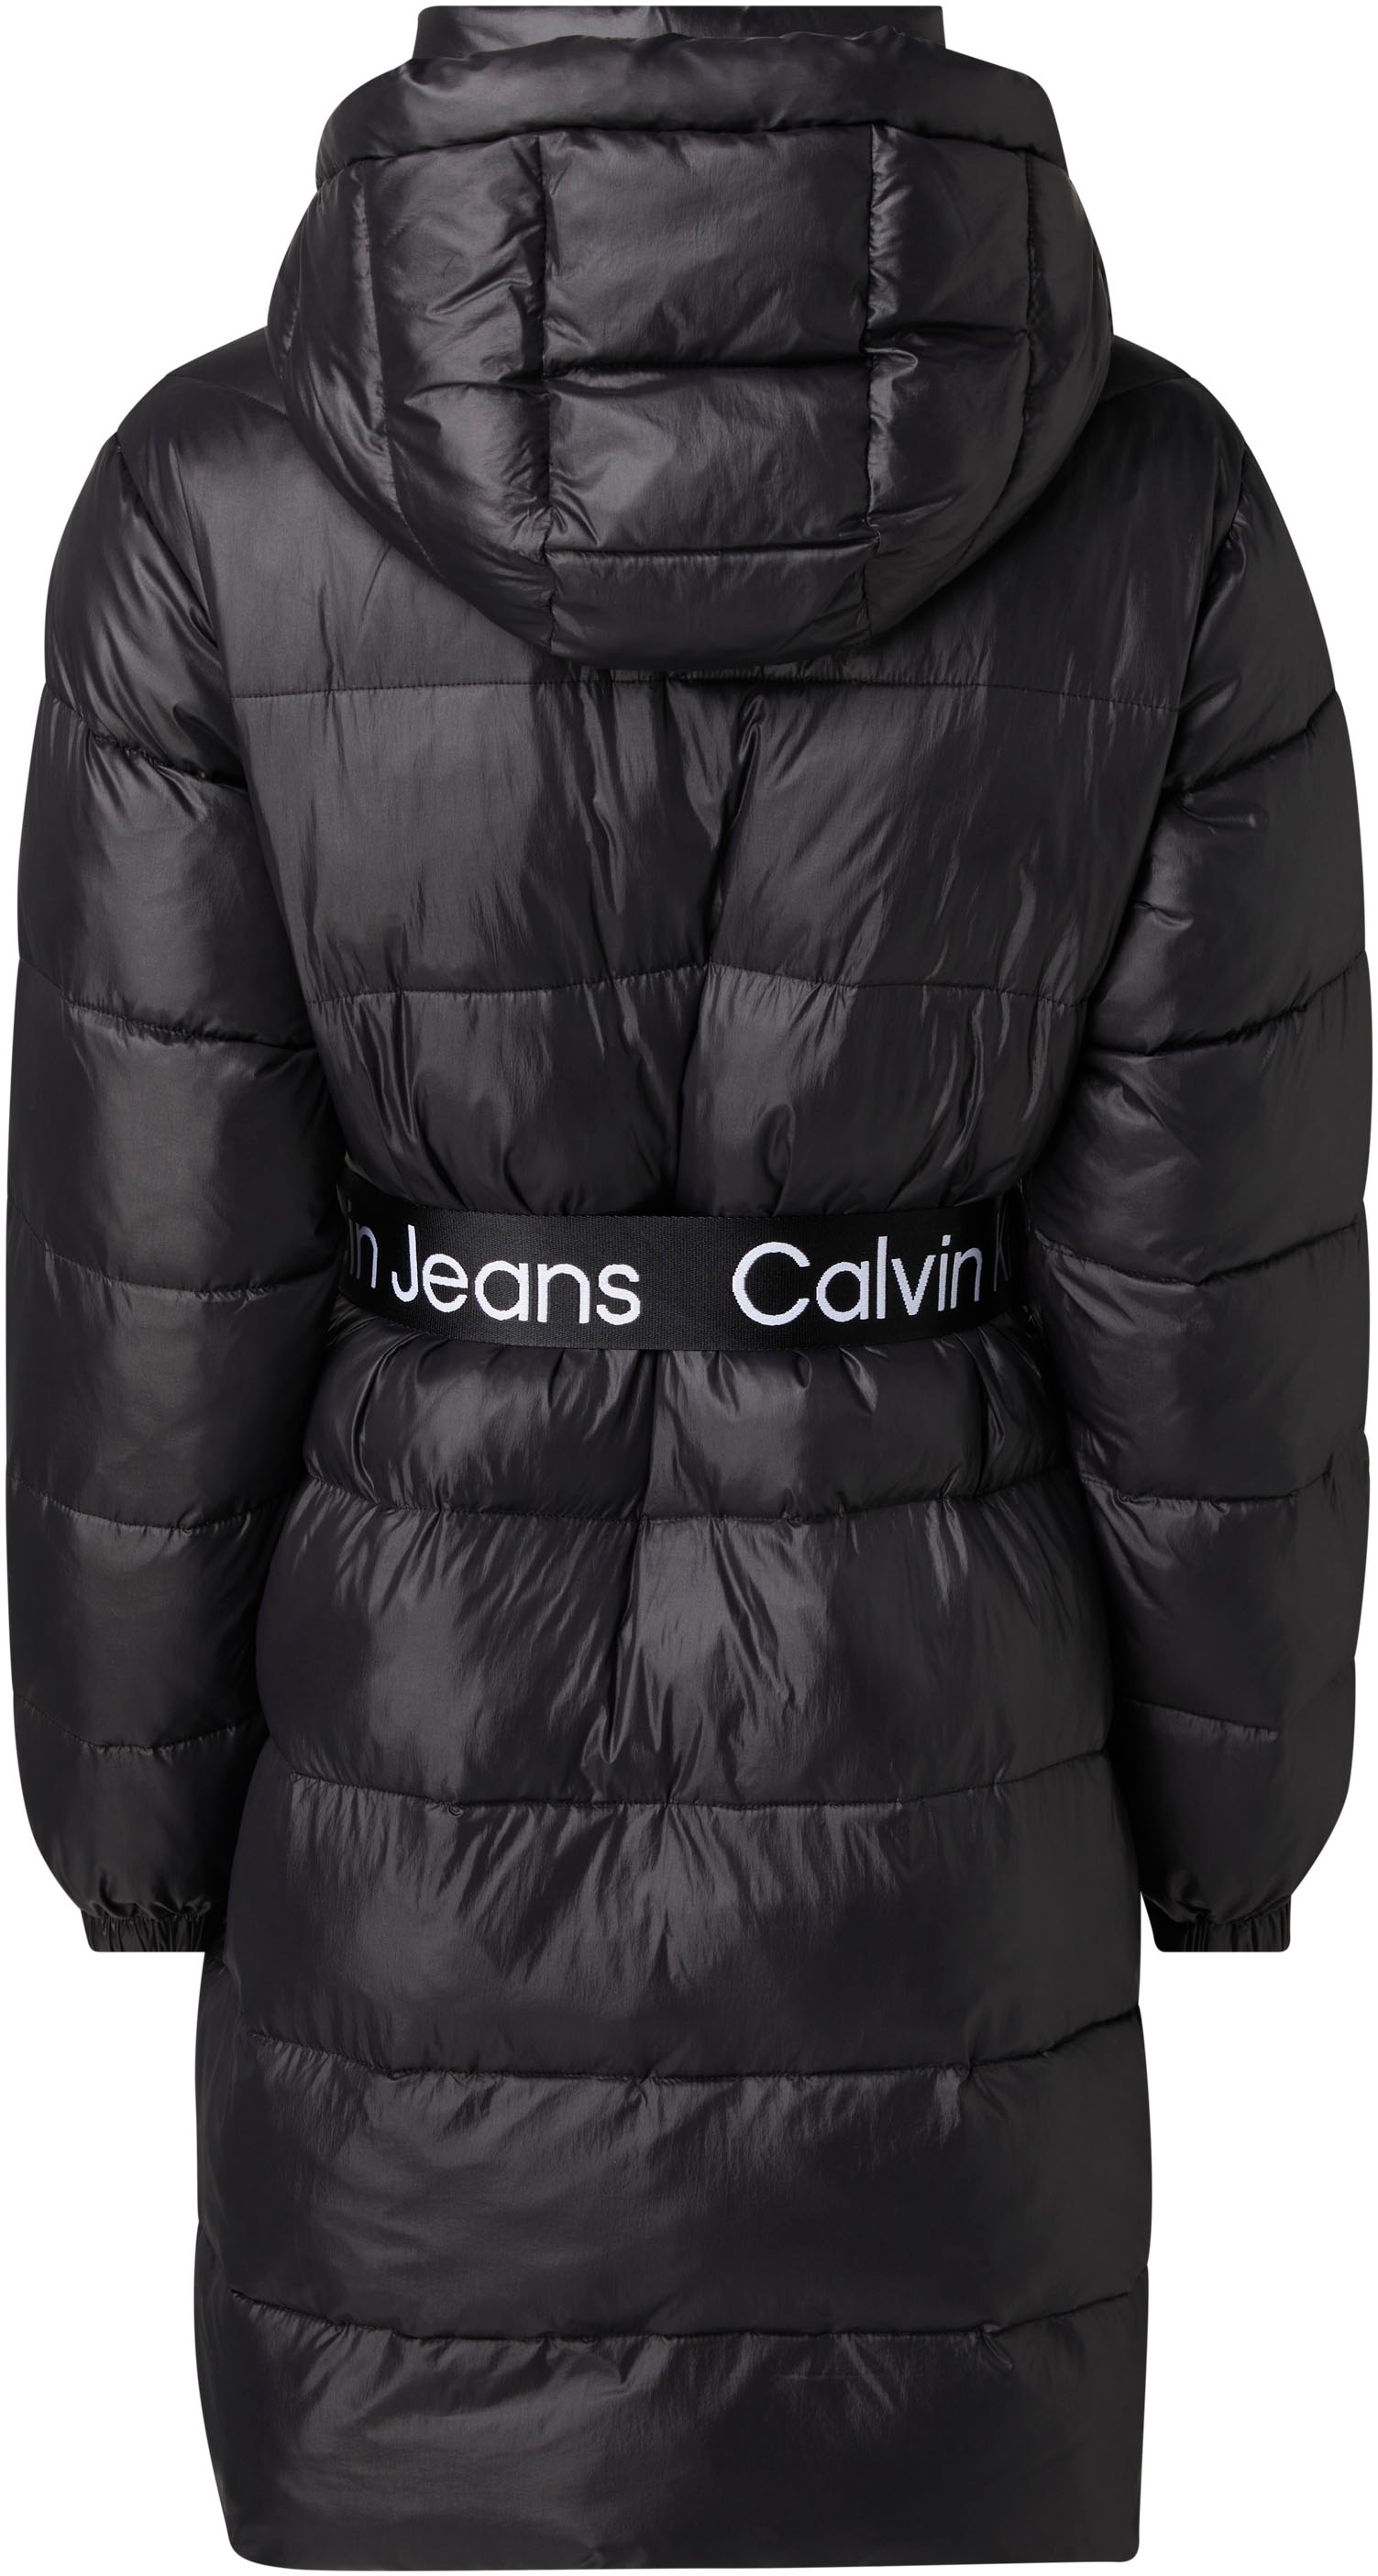 Steppjacke Jeans LONG Calvin »LW mit Klein PADDED Kapuze JACKET«, FITTED OTTO bei